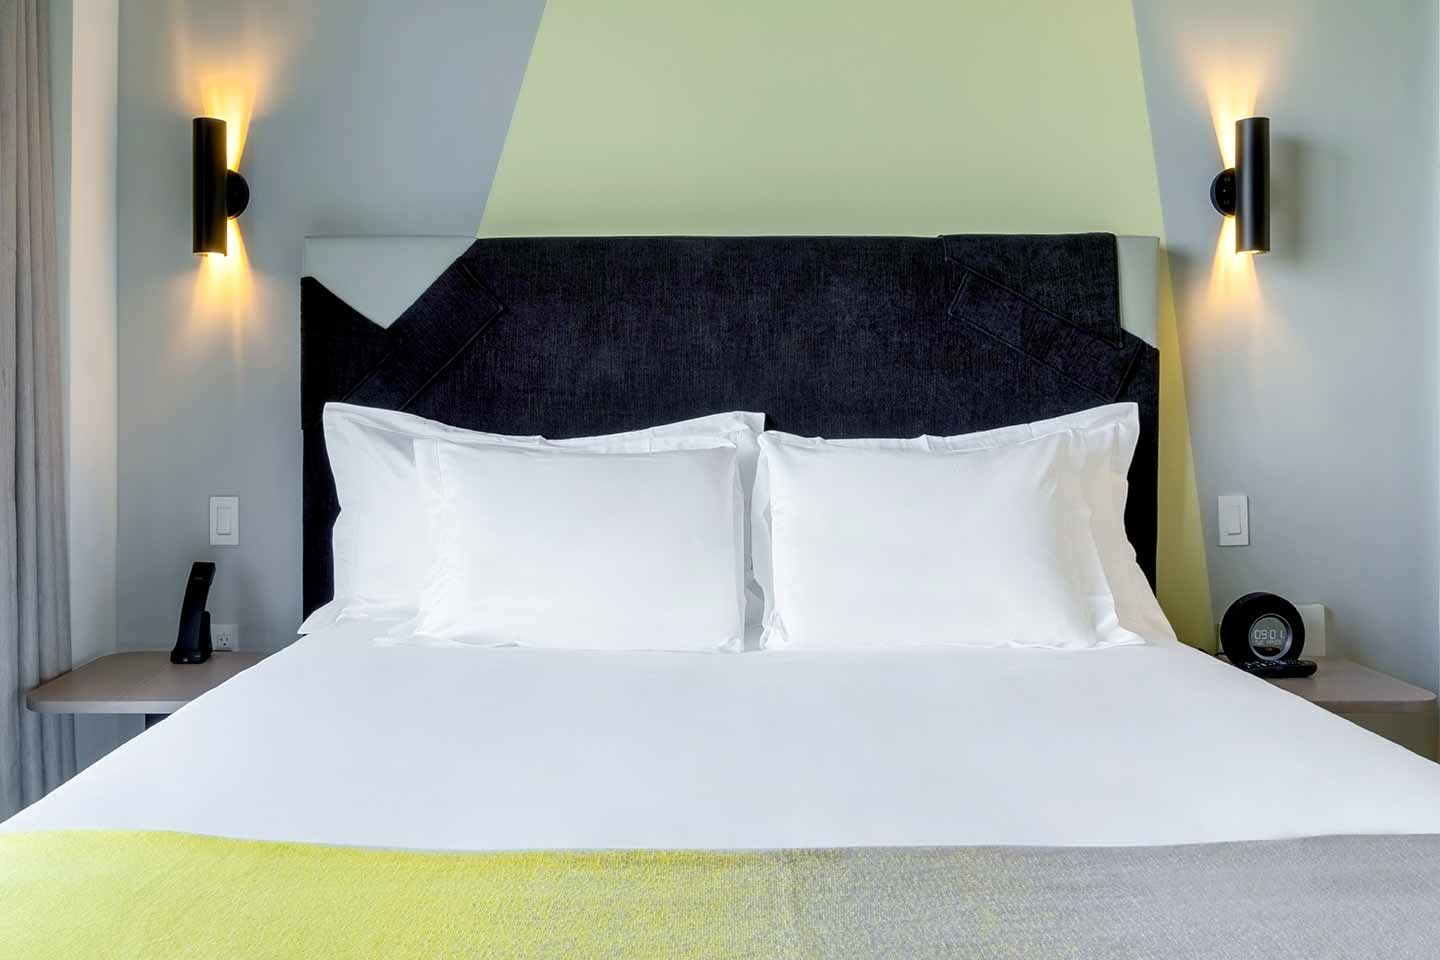 A double bed with bedside lights on each side